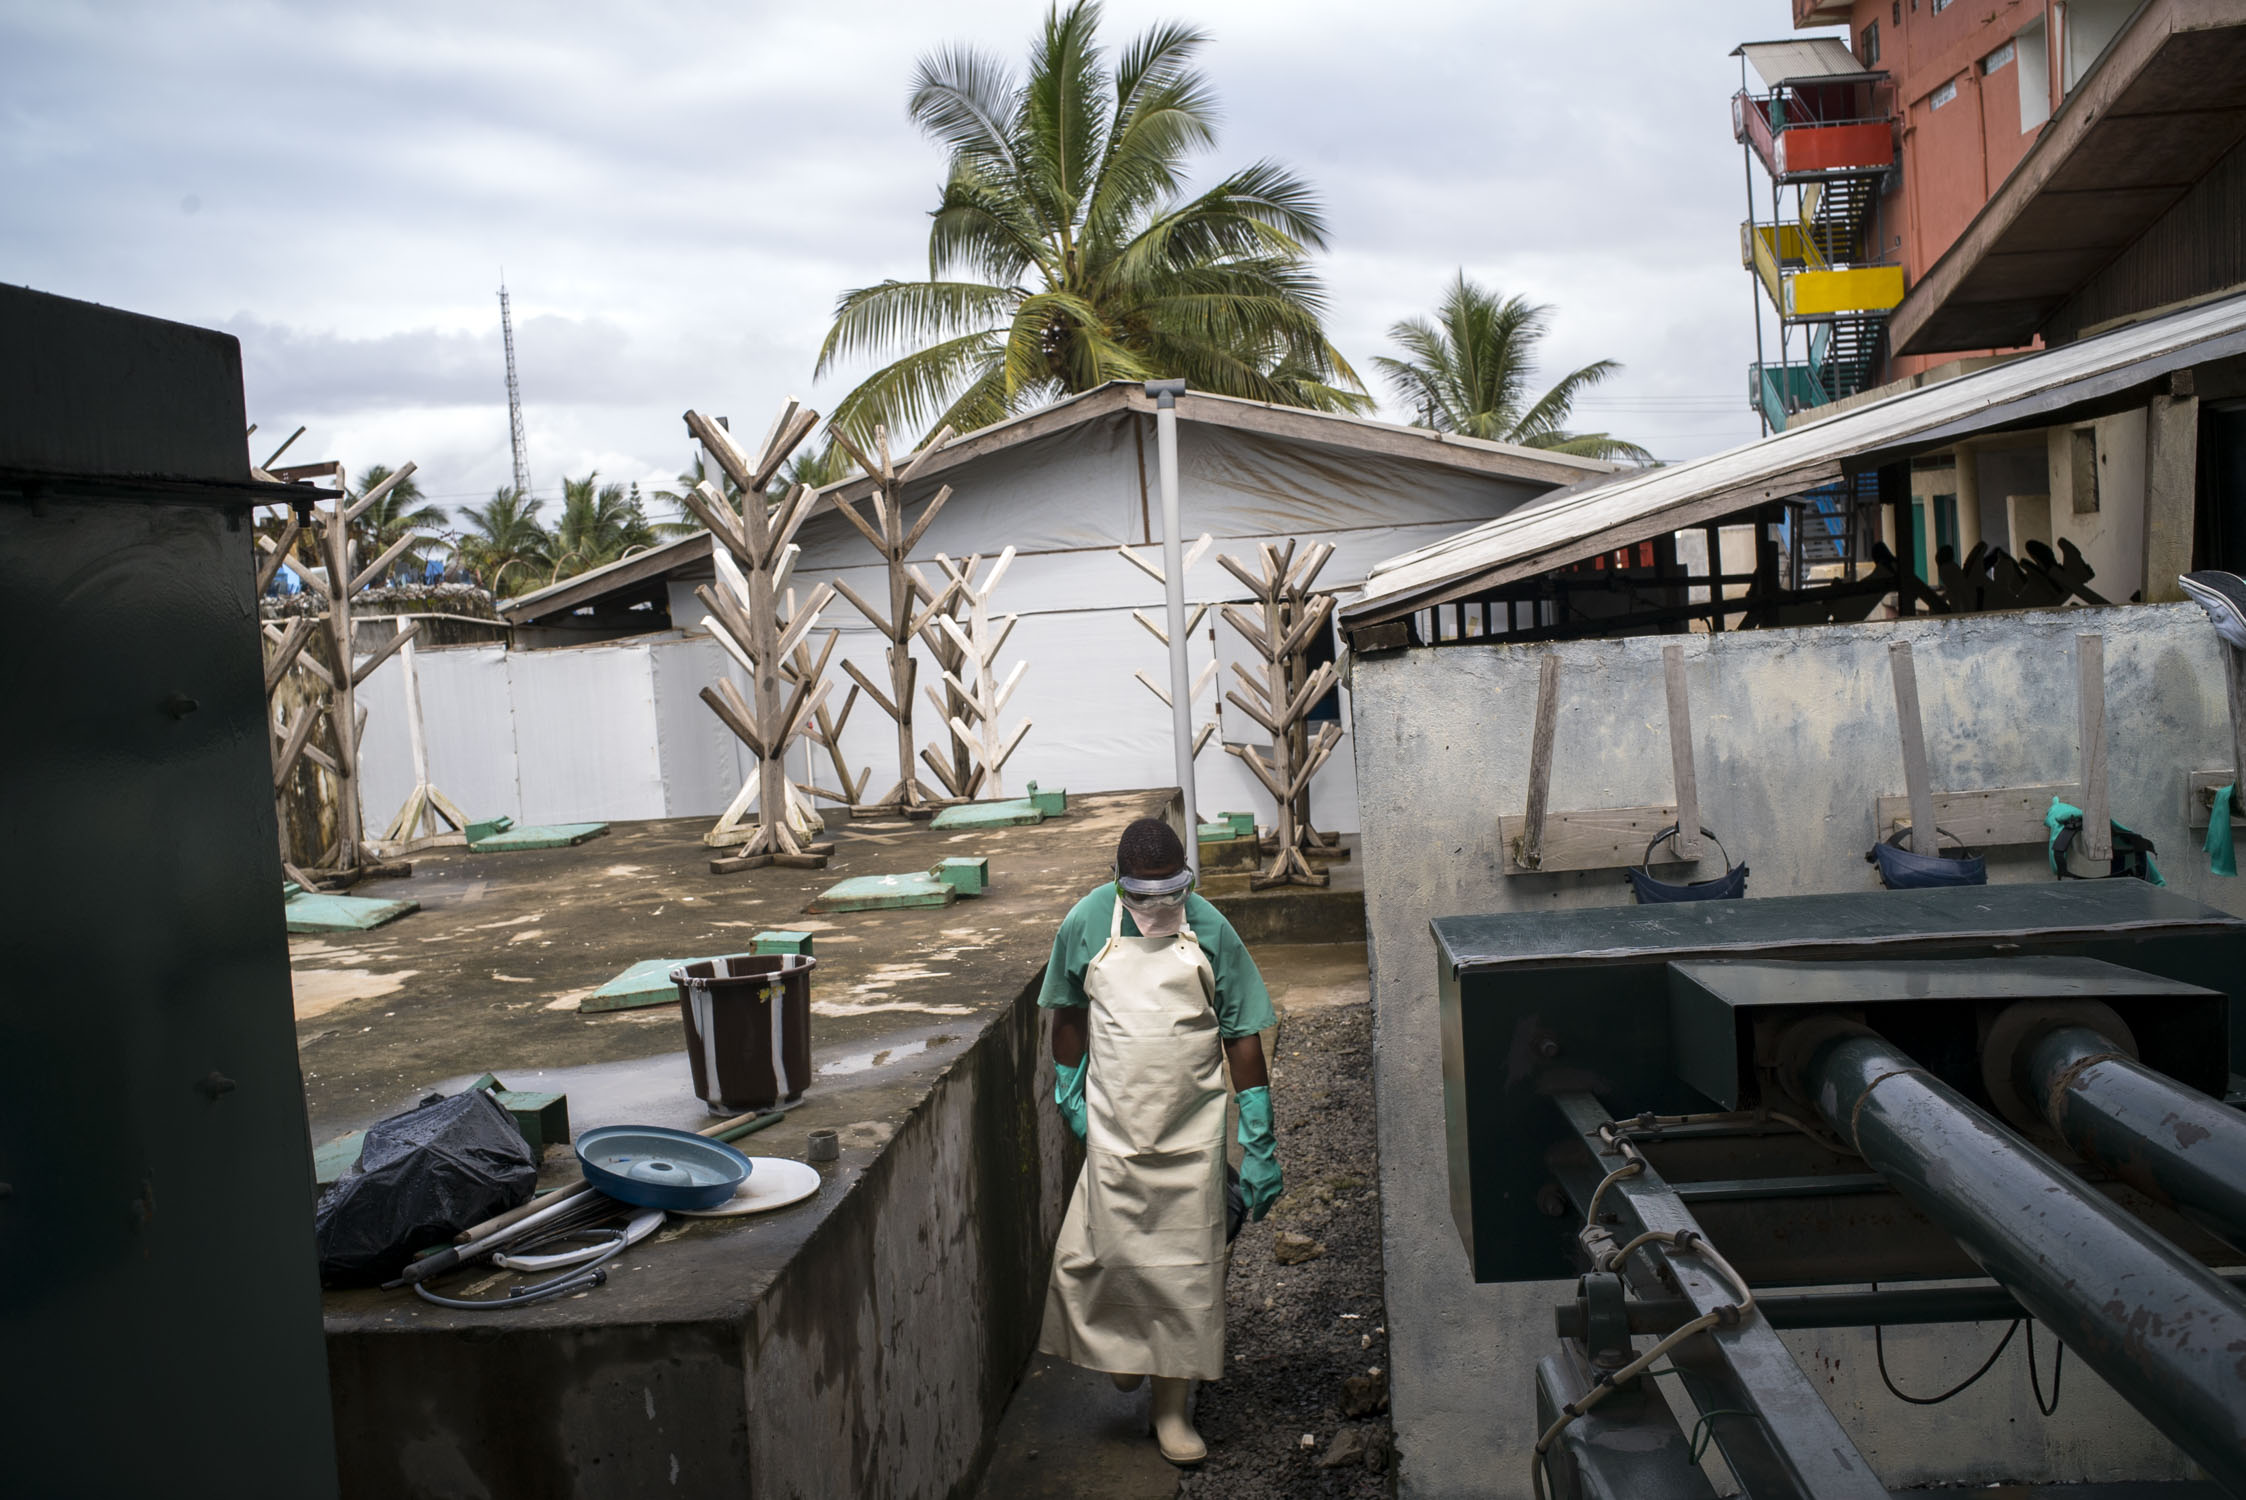  A sanitation worker walks though the back courtyard of an MSF hospital in Monrovia, Liberia. In the aftermath of the the ebola epidemic of 2014/15 that left an estimated 4800 dead in Liberia, the hospital adheres to especially strict routine sanitat